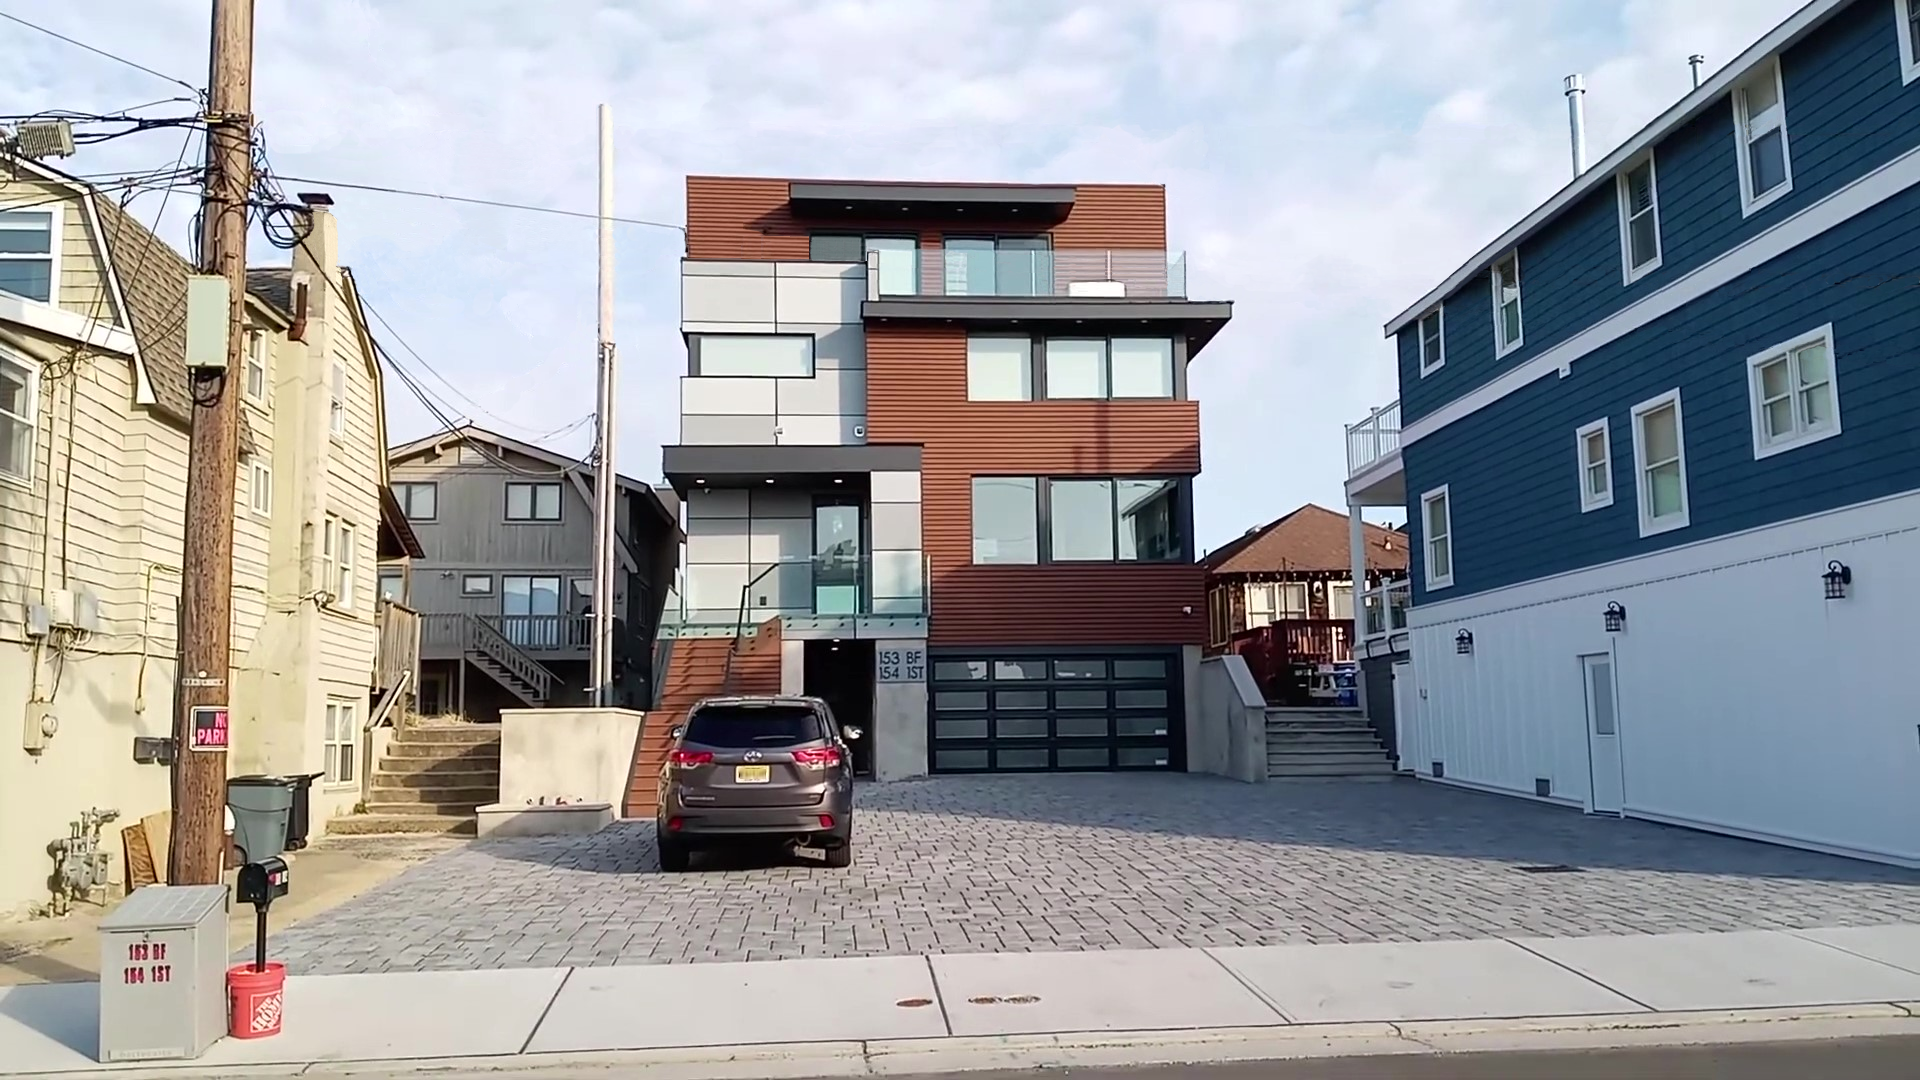 Contemporary Style House at Jersey Shore